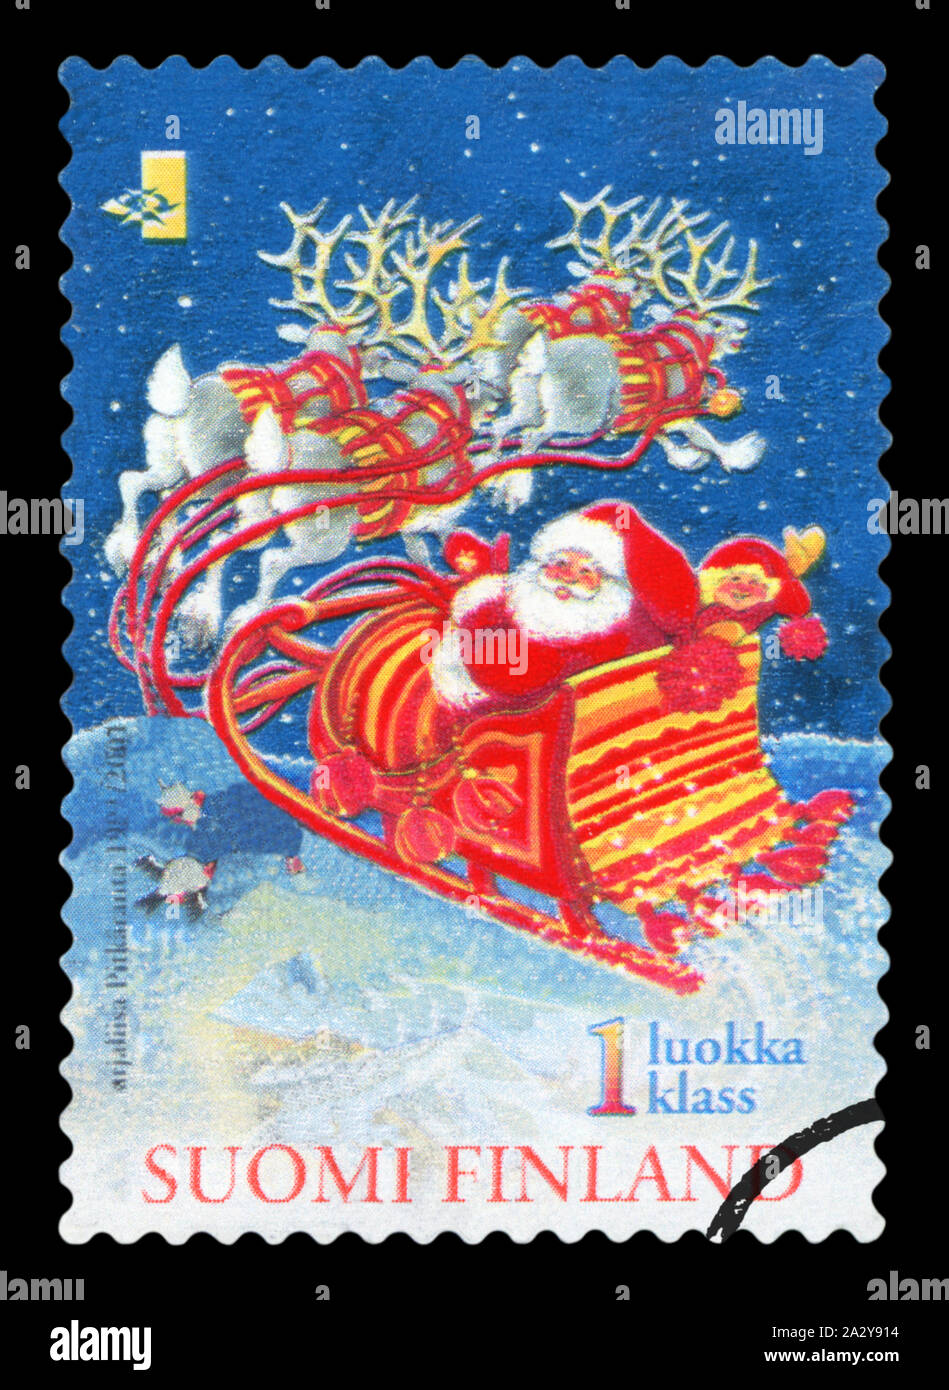 FINLAND - CIRCA 1991: stamp printed by Finland, shows Reindeer pulling Santa sleigh, circa 1991 Stock Photo